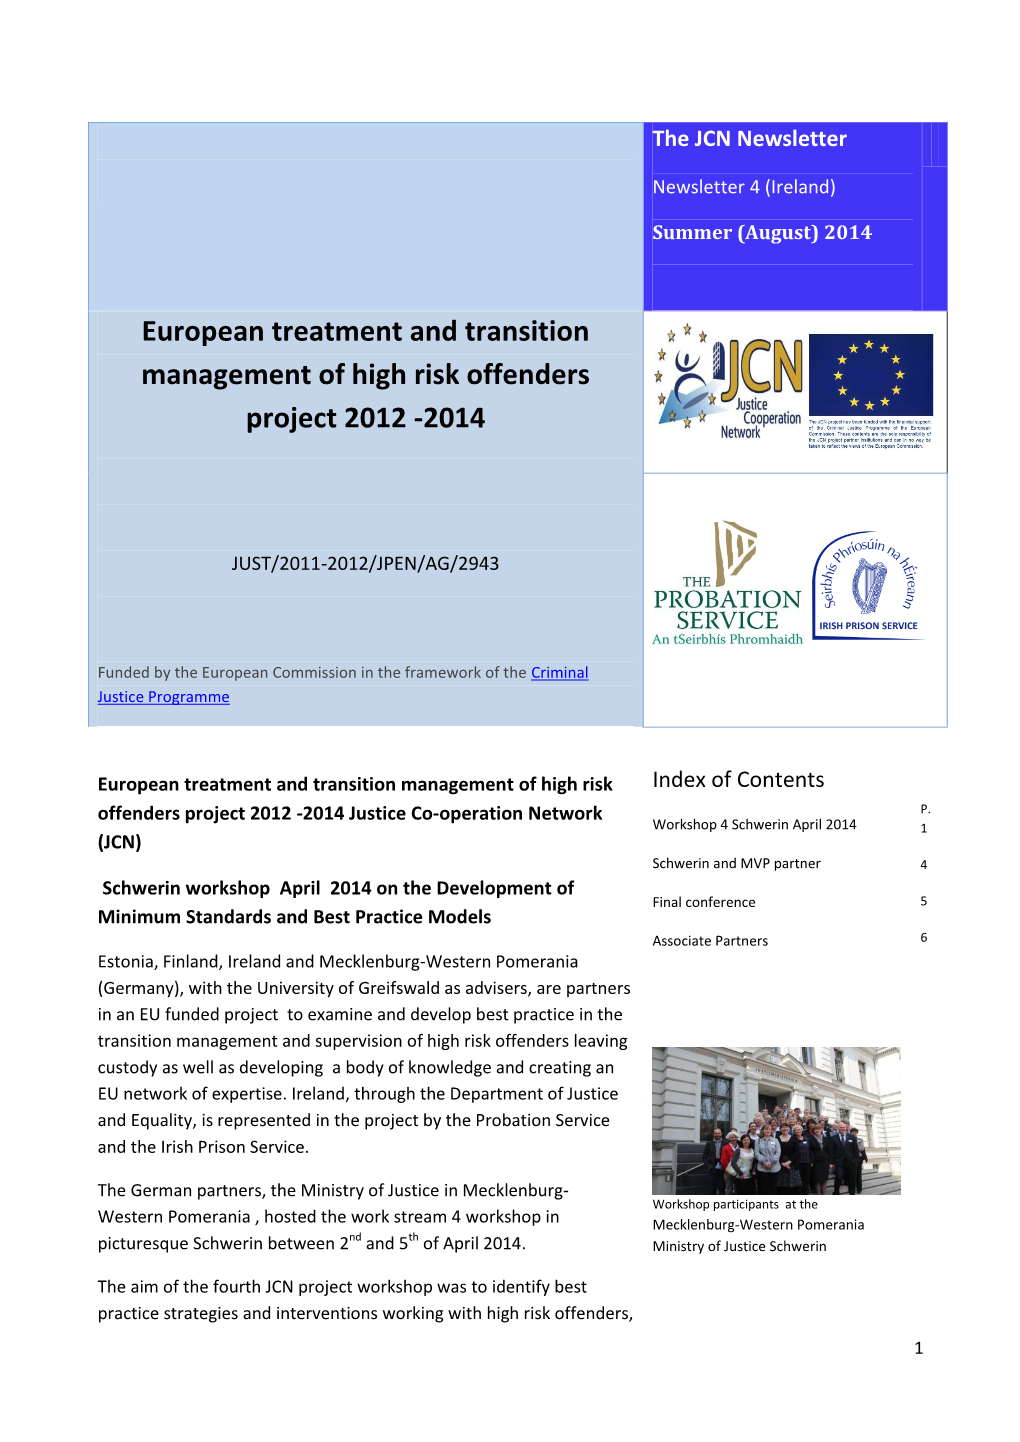 European Treatment and Transition Management of High Risk Offenders Project 2012 -2014